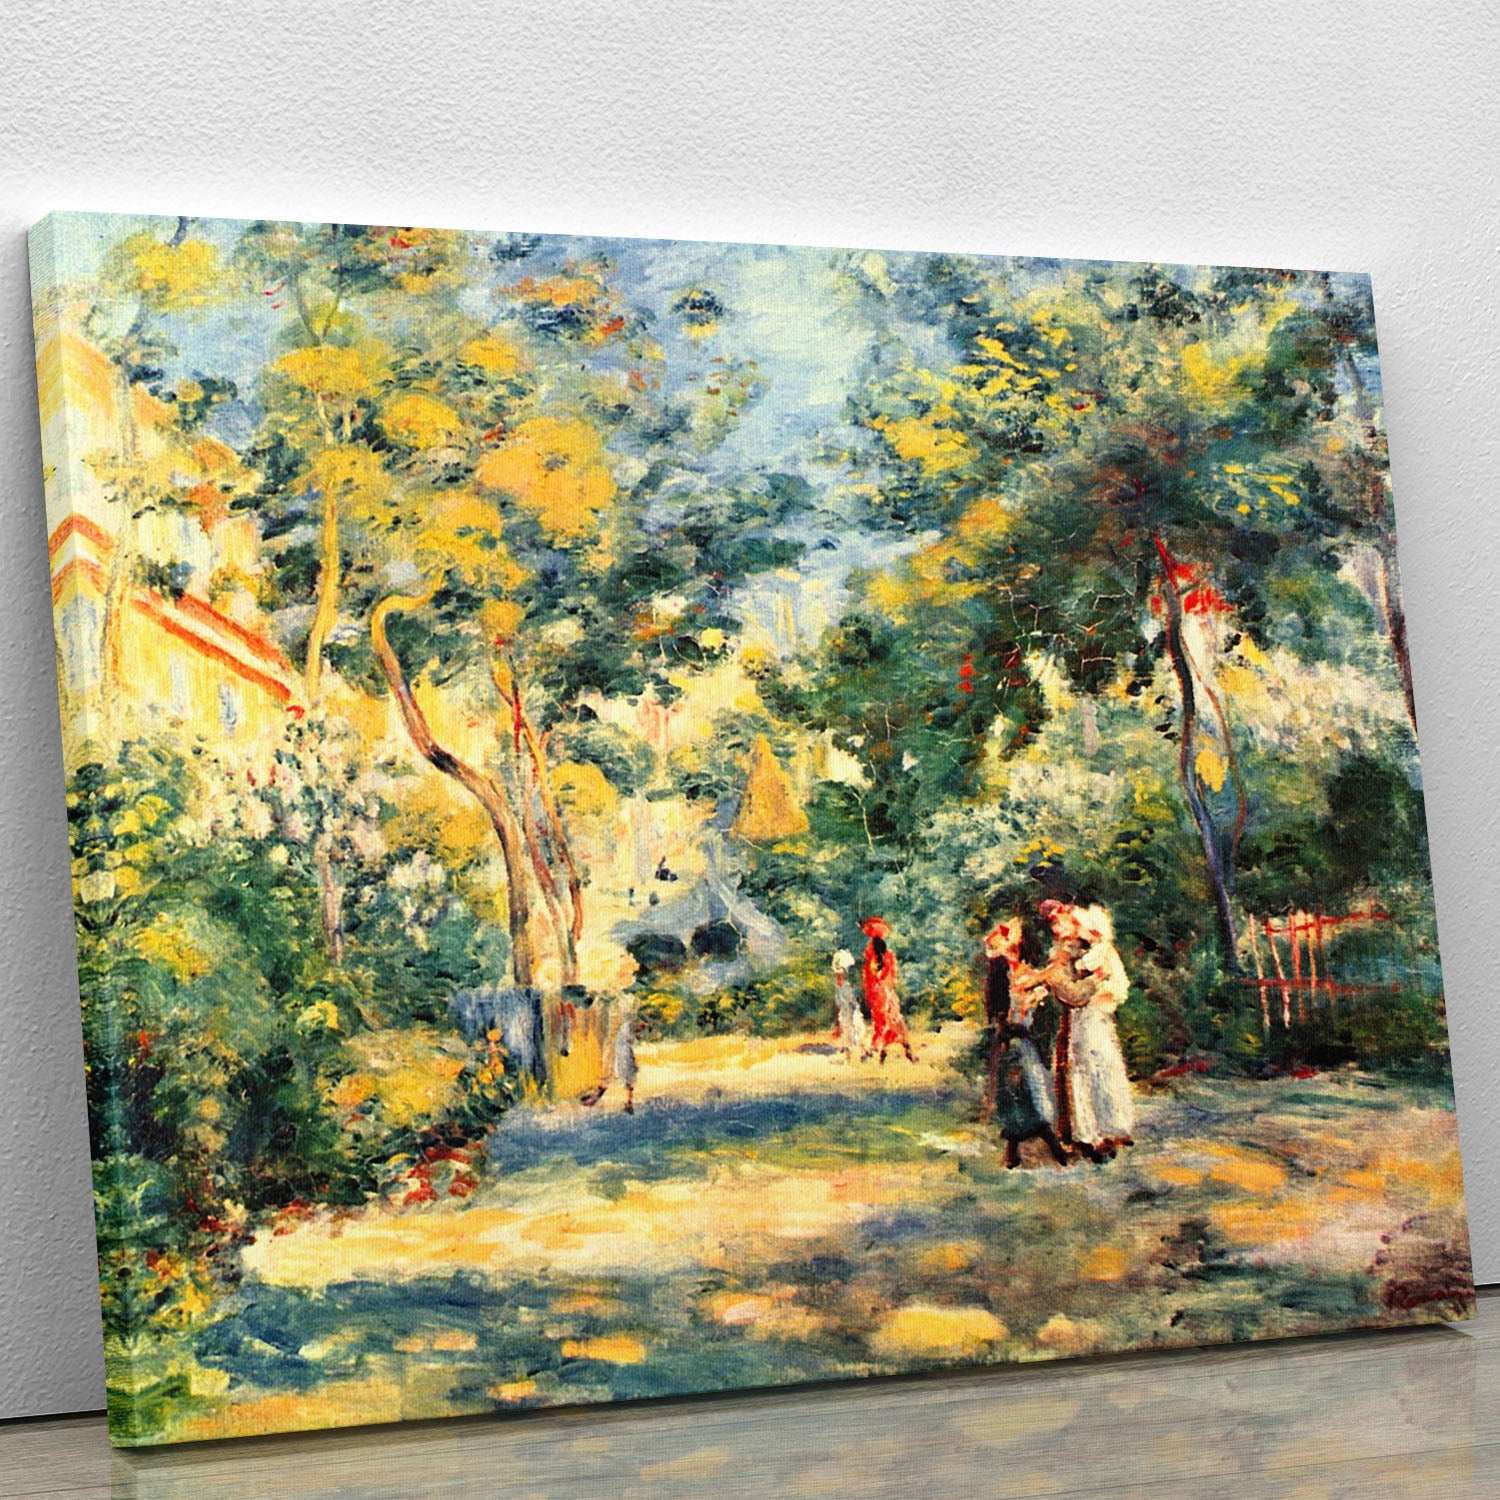 Figures in the garden by Renoir Canvas Print or Poster - Canvas Art Rocks - 1